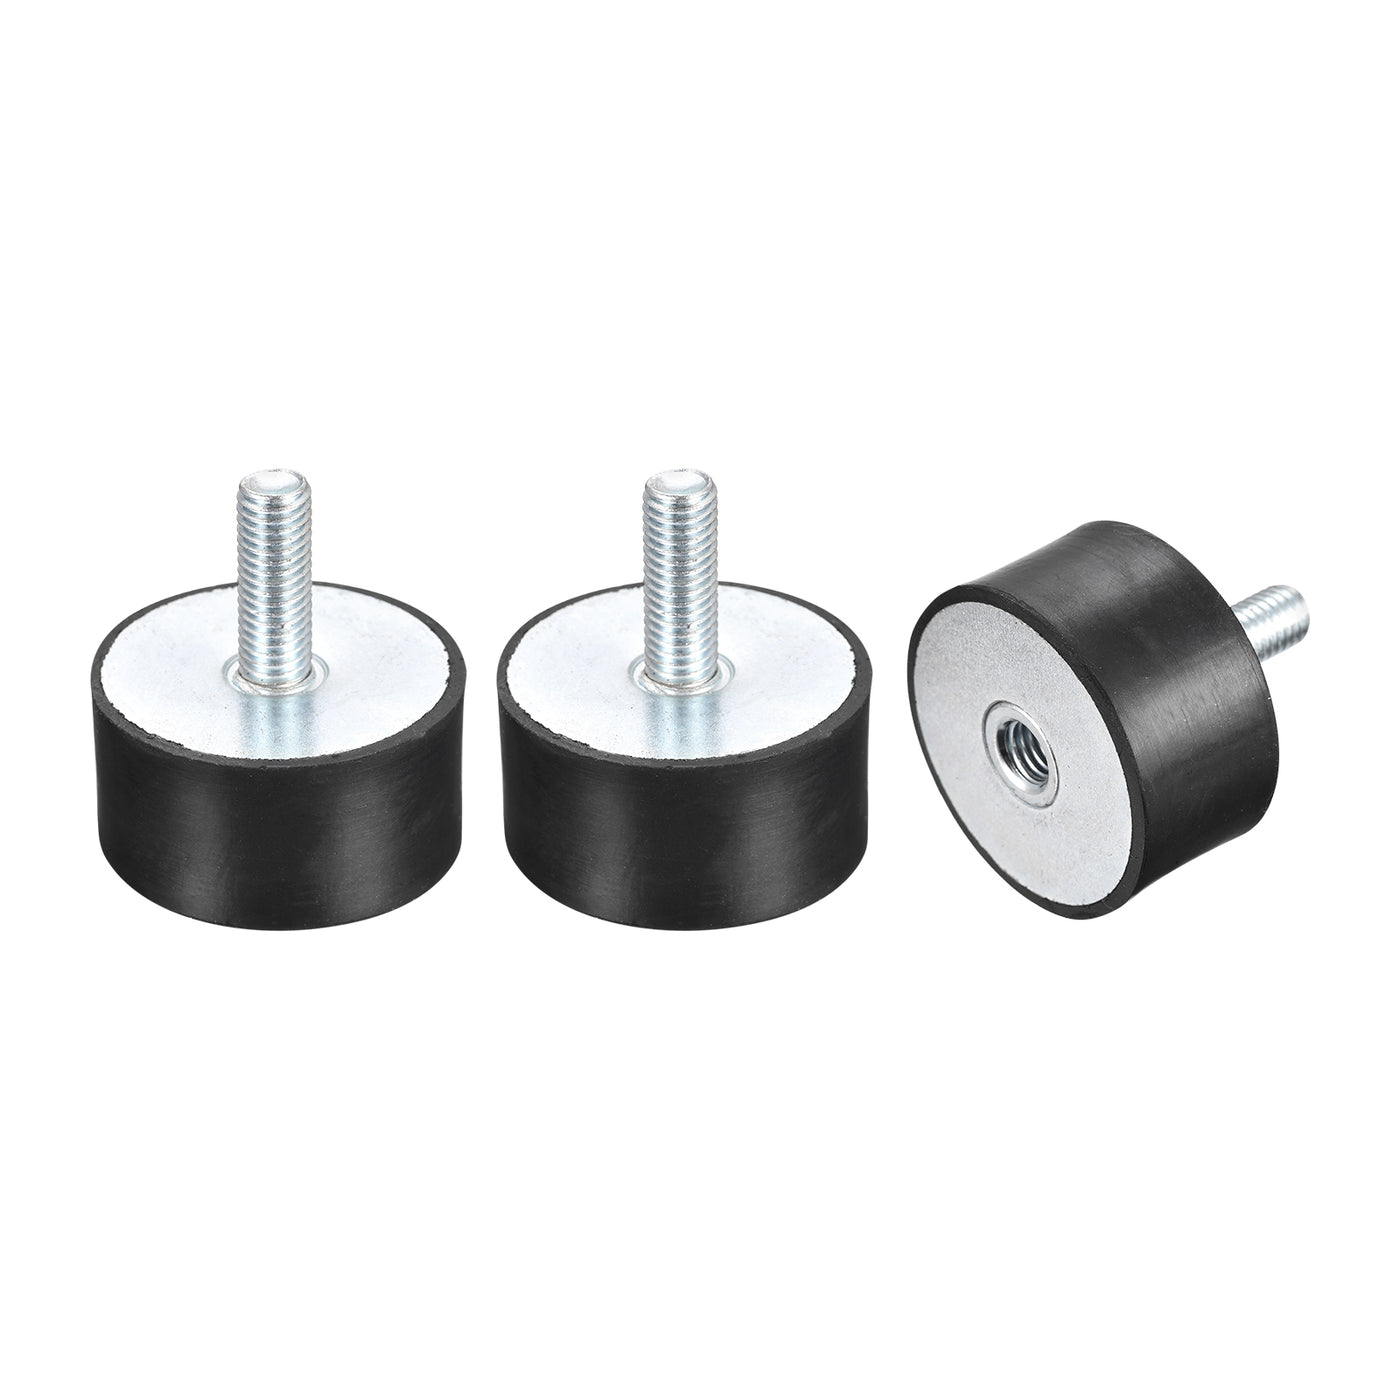 uxcell Uxcell Rubber Mount 3pcs M10 Male/Female Vibration Isolator Shock Absorber D50mmxH25mm